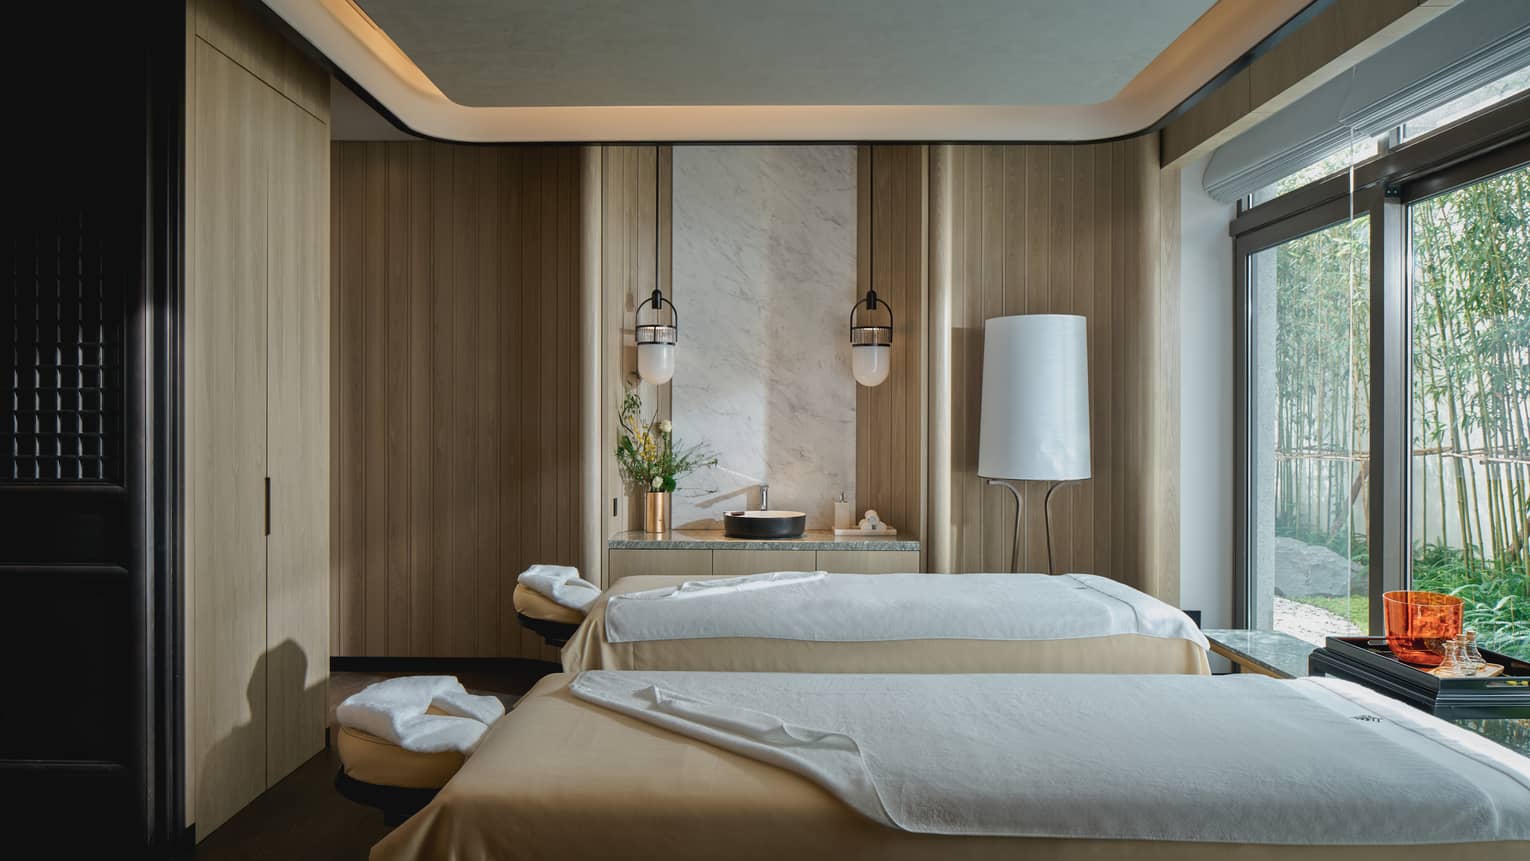 Two spa beds draped with tan and white blankets in front of tall windows